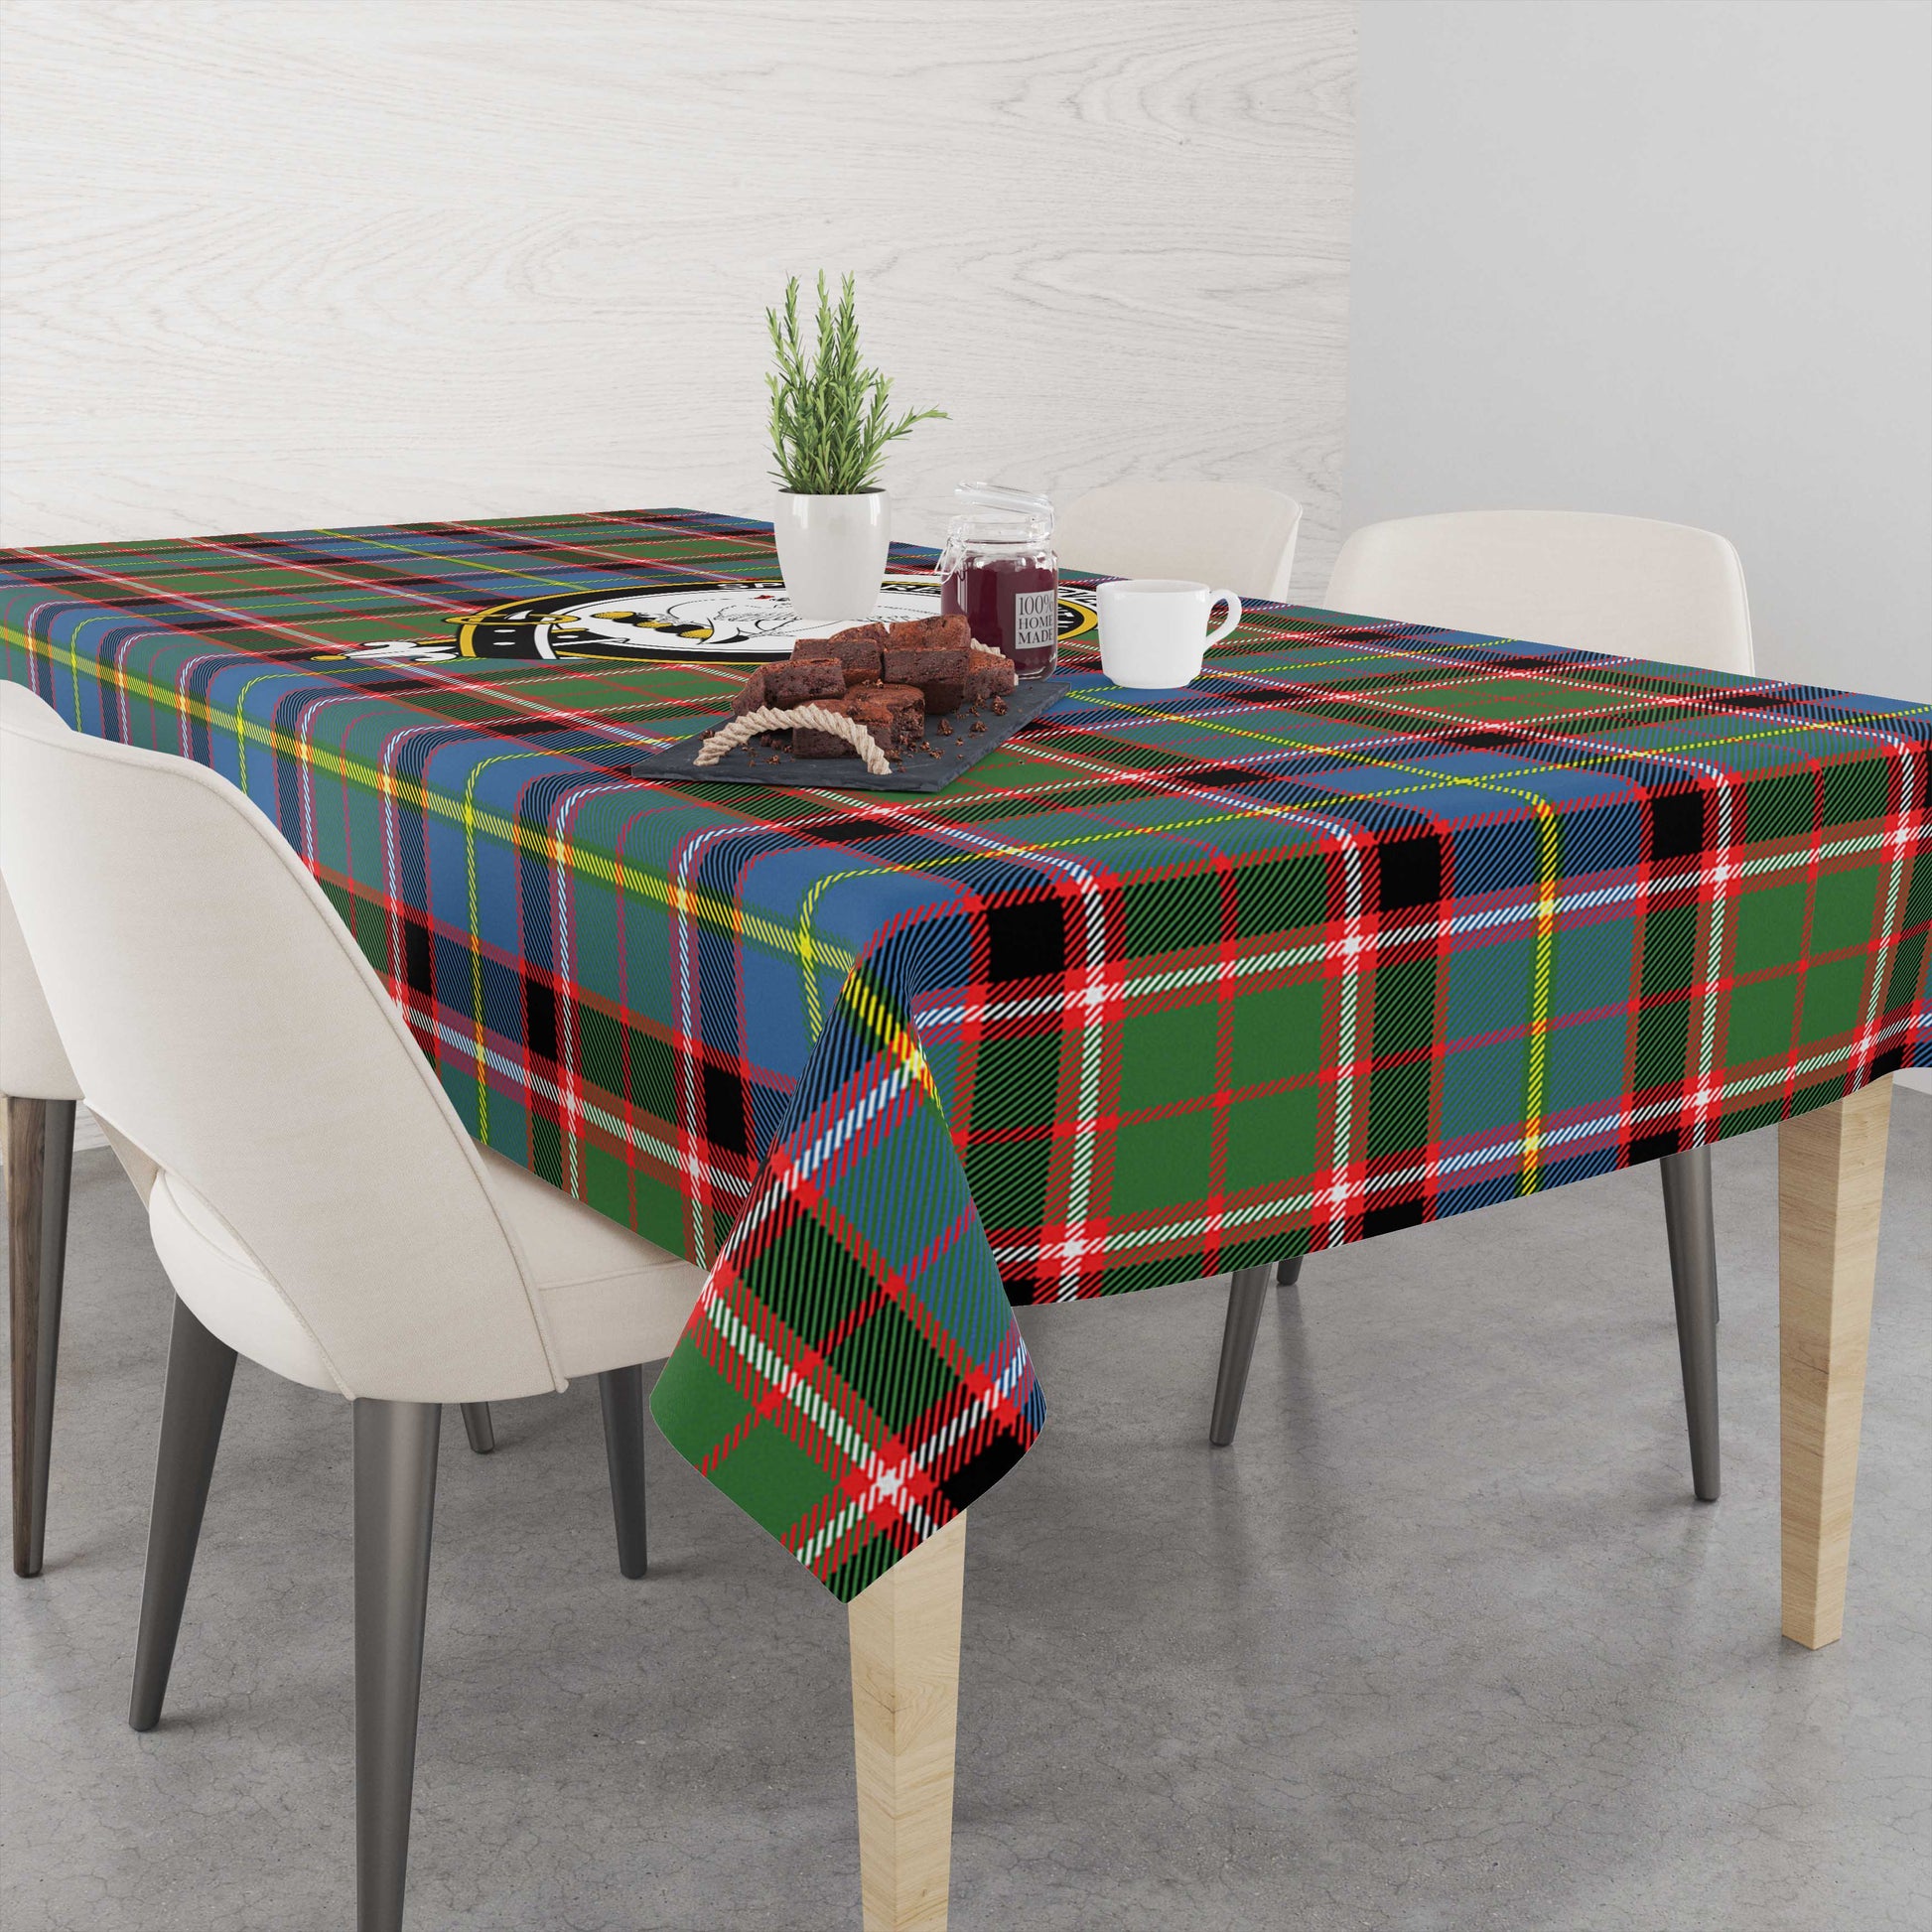 norvel-tatan-tablecloth-with-family-crest